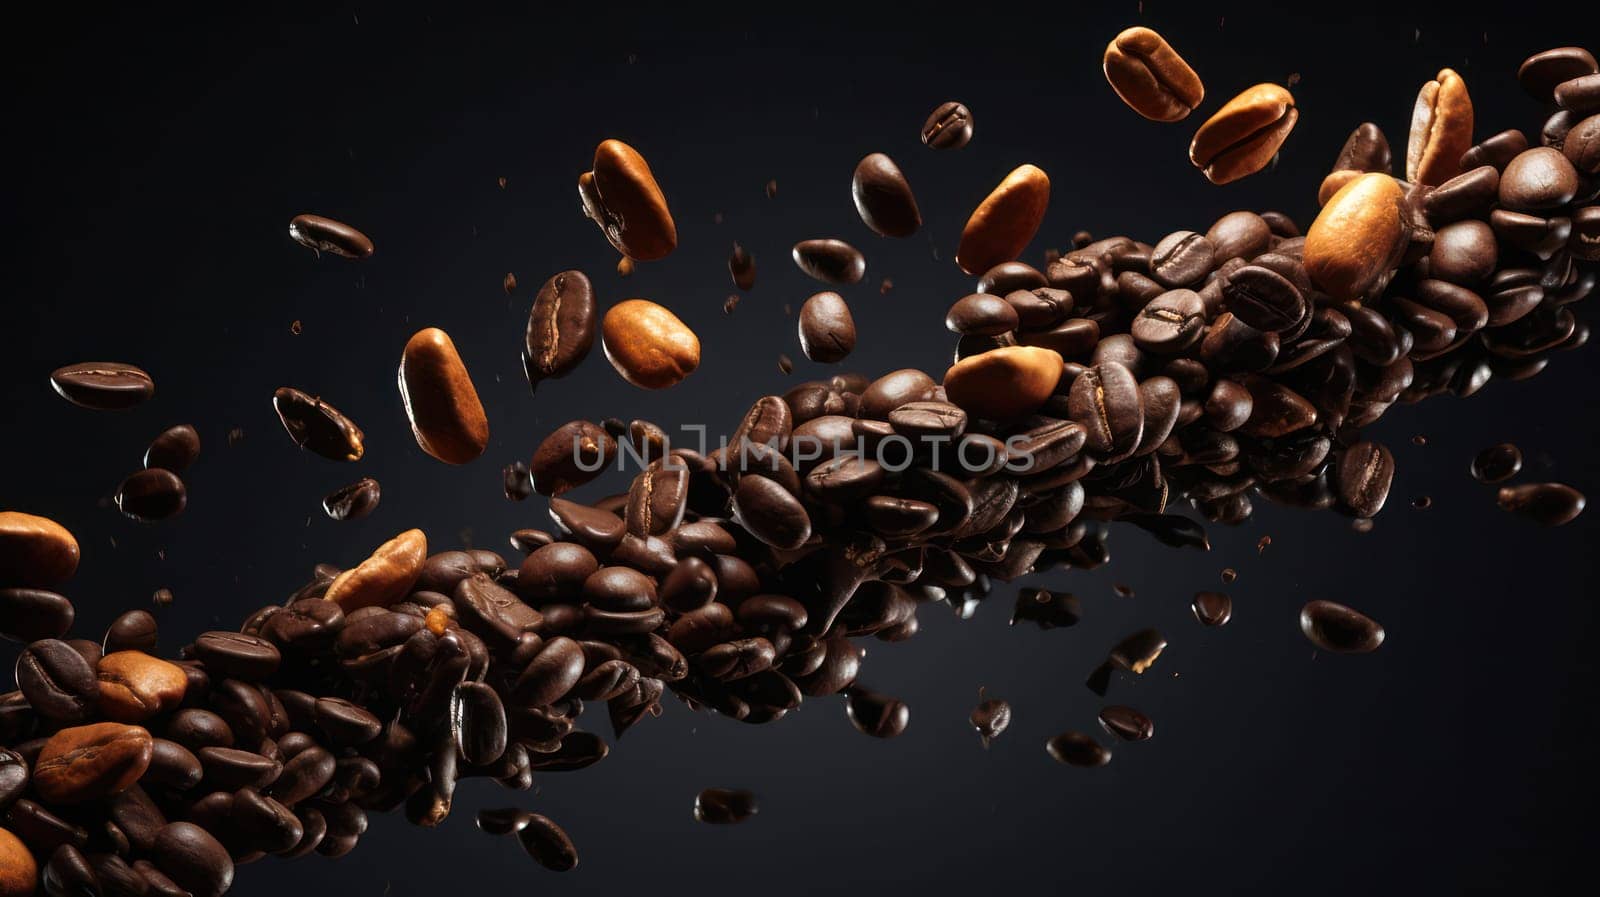 Roasted Caffeine Kick: A Close-Up Capture of Fresh, Aromatic Coffee Beans on a Wooden Table